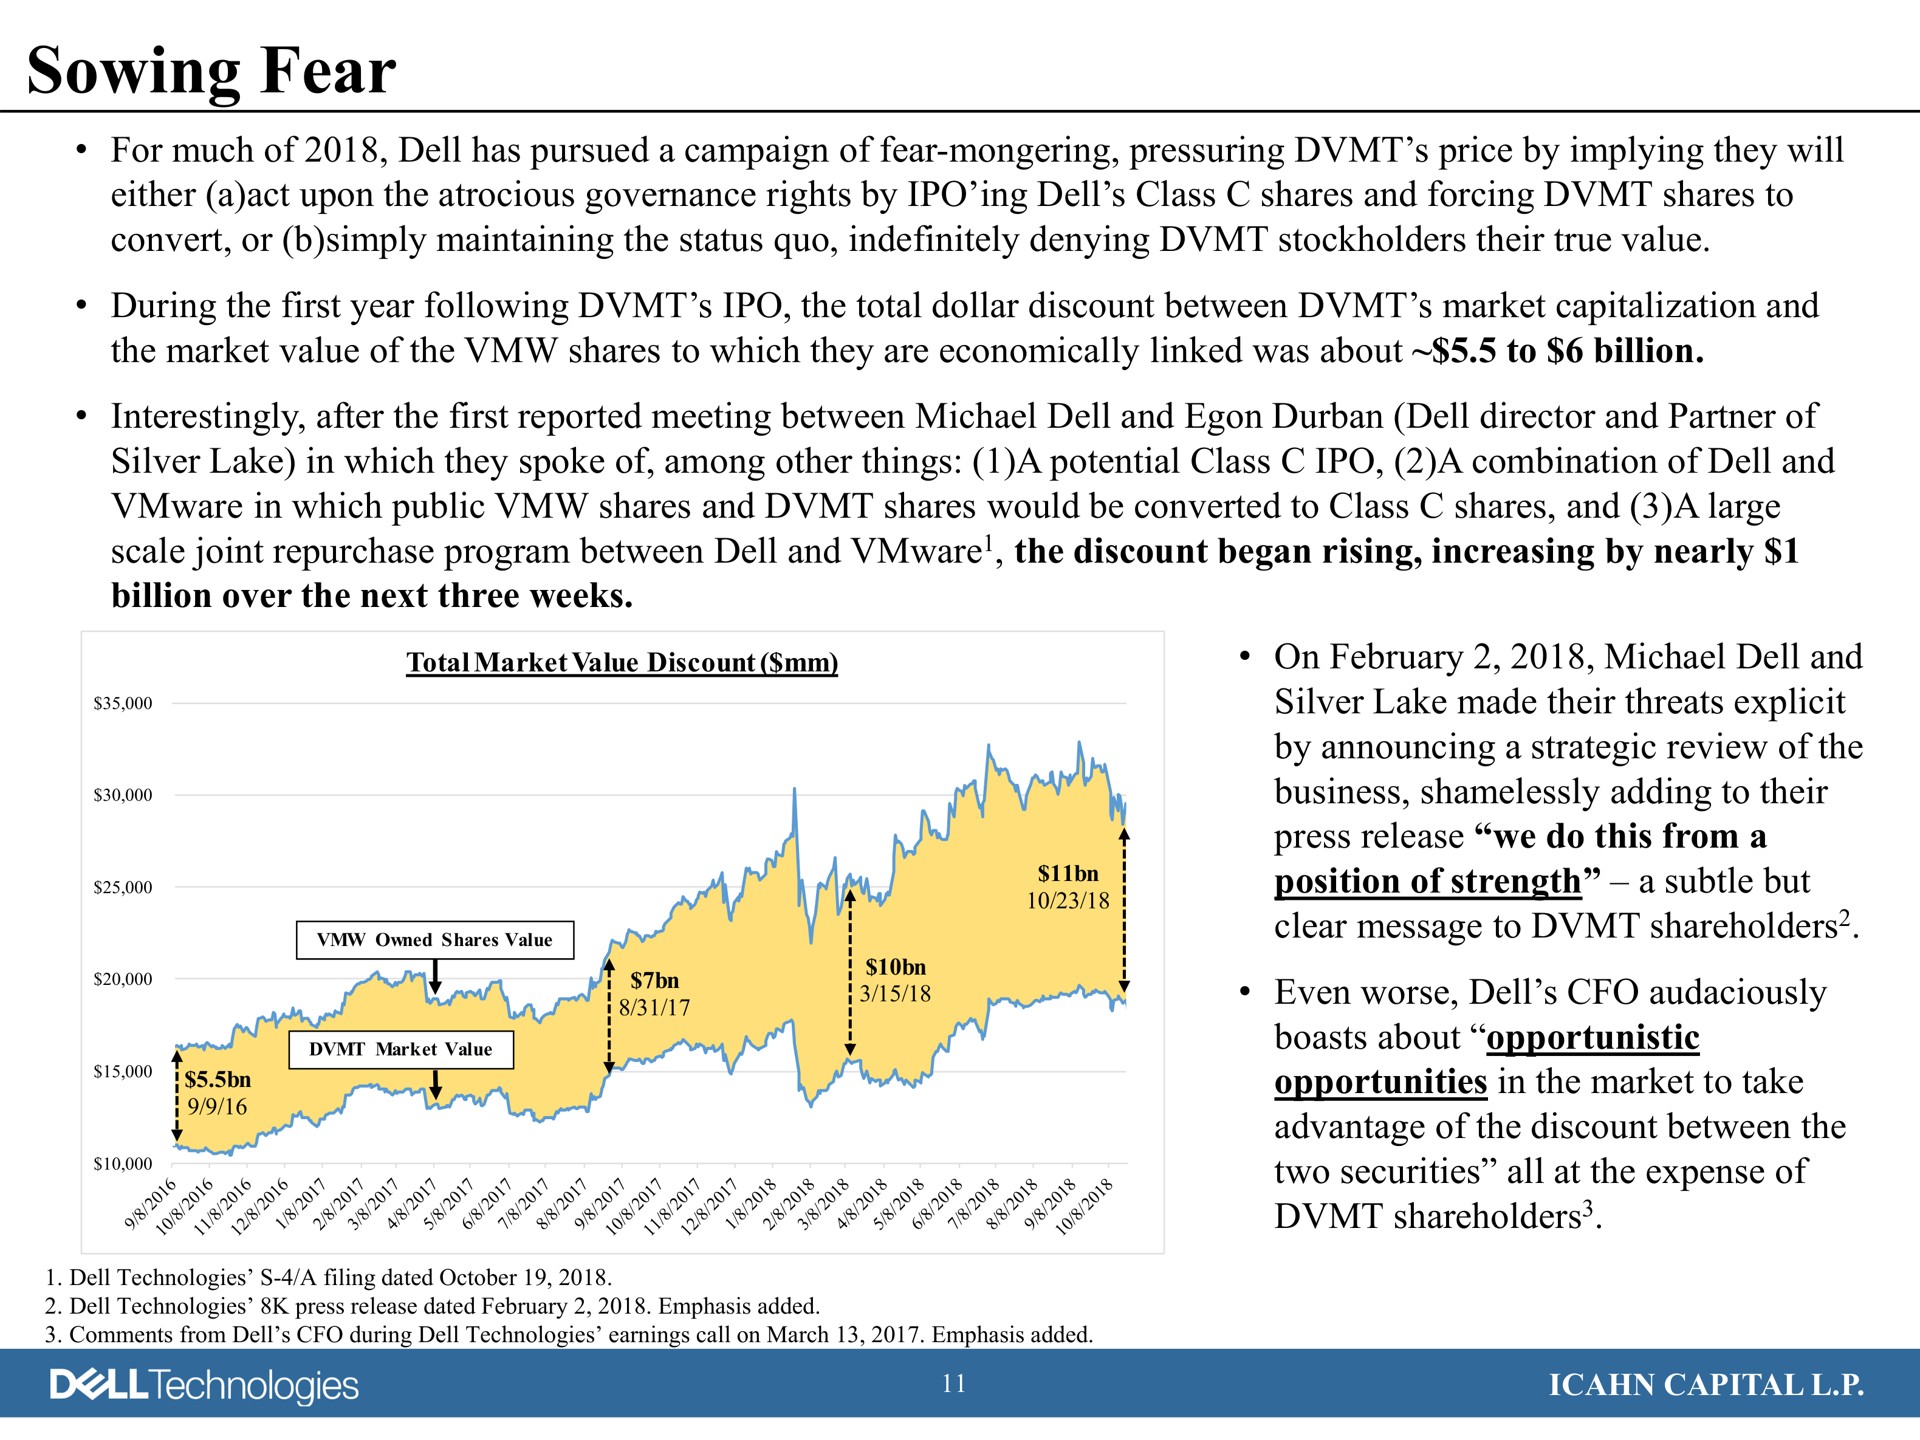 sowing fear even worse dell audaciously technologies capital | Icahn Enterprises